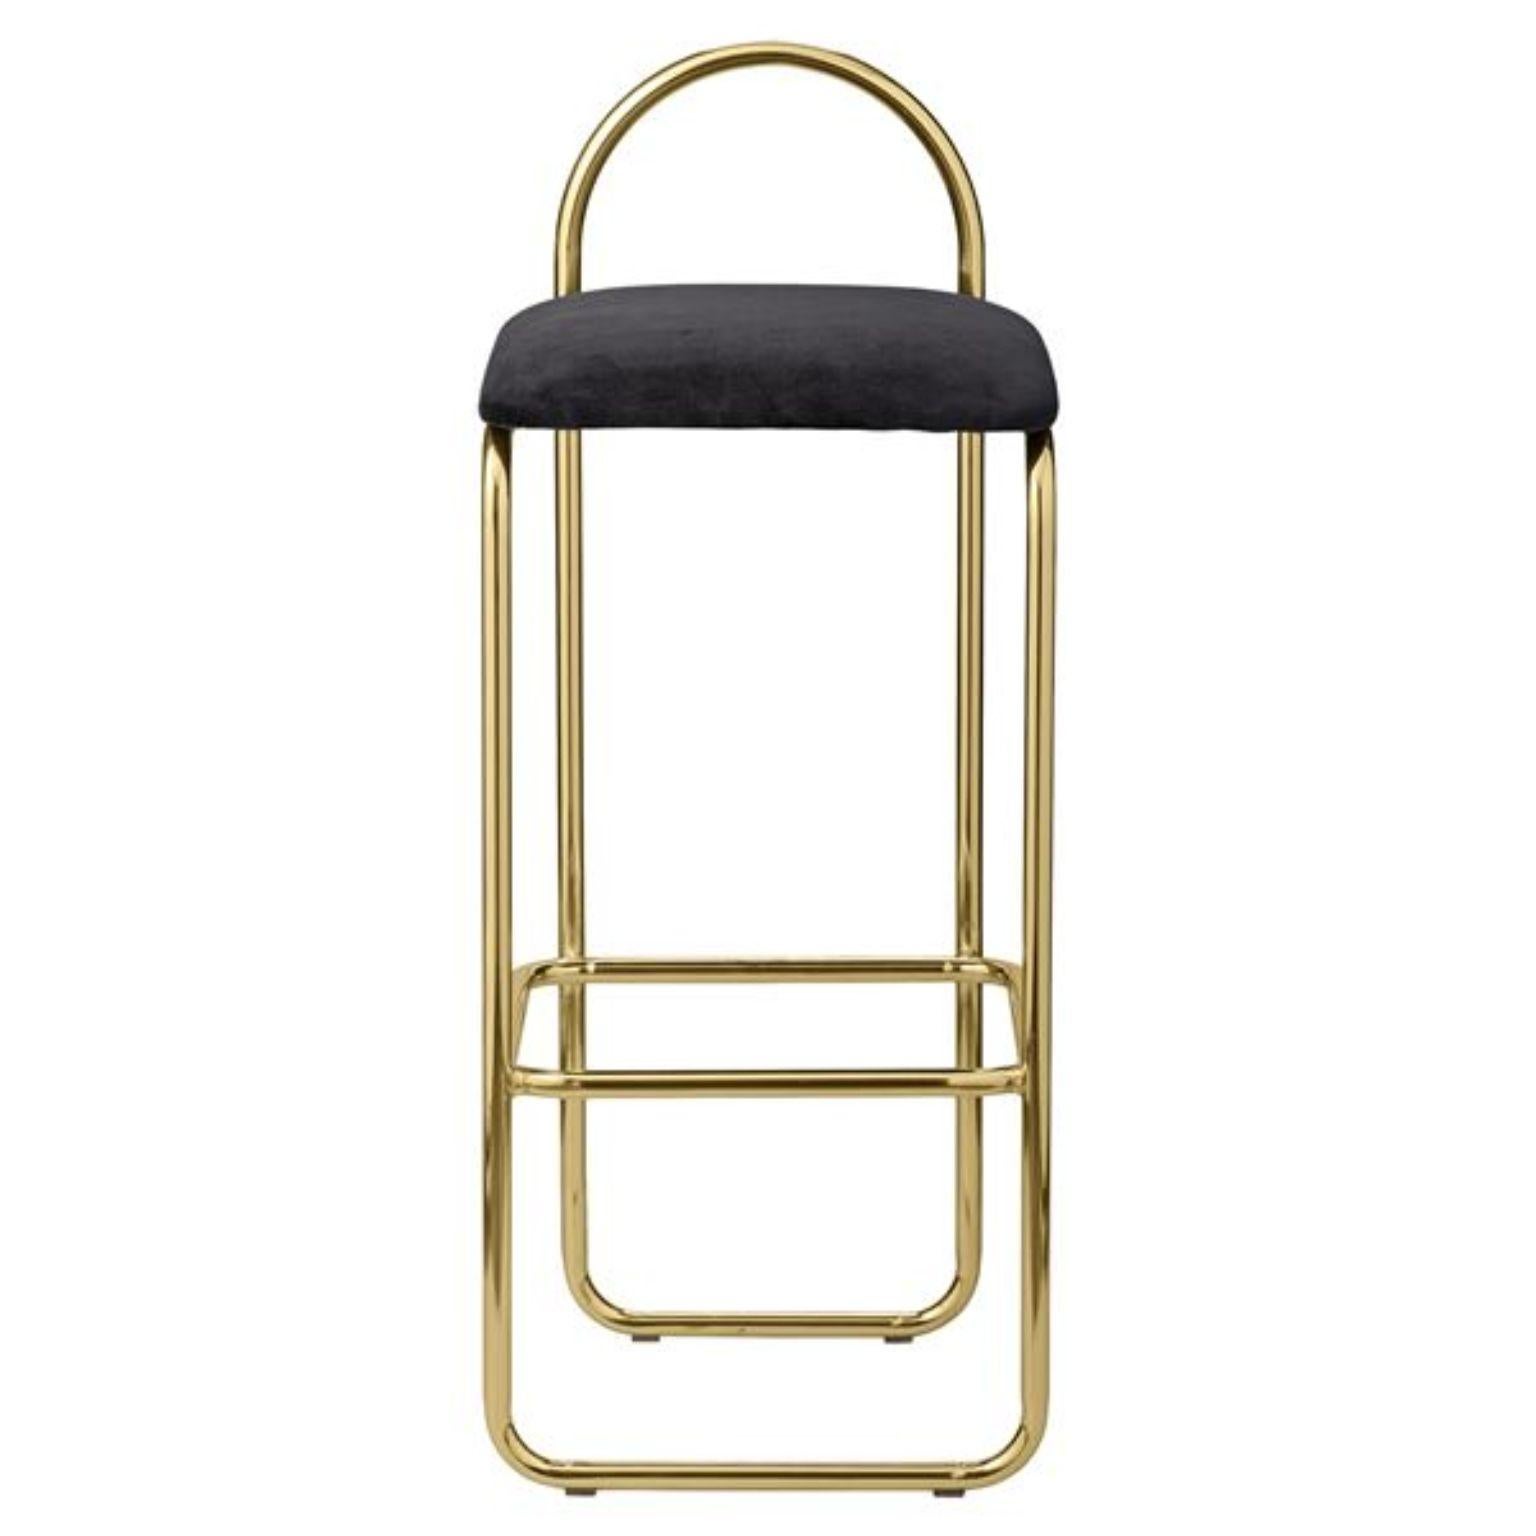 Anthracite velvet and gold Minimalist bar chair 92.5
Dimensions: L 37 x W 39 x H 92.5 CM
Materials: Velvet, steel

The collection includes benches, chairs, shelves and mirrors in a wide variety of sizes.
  